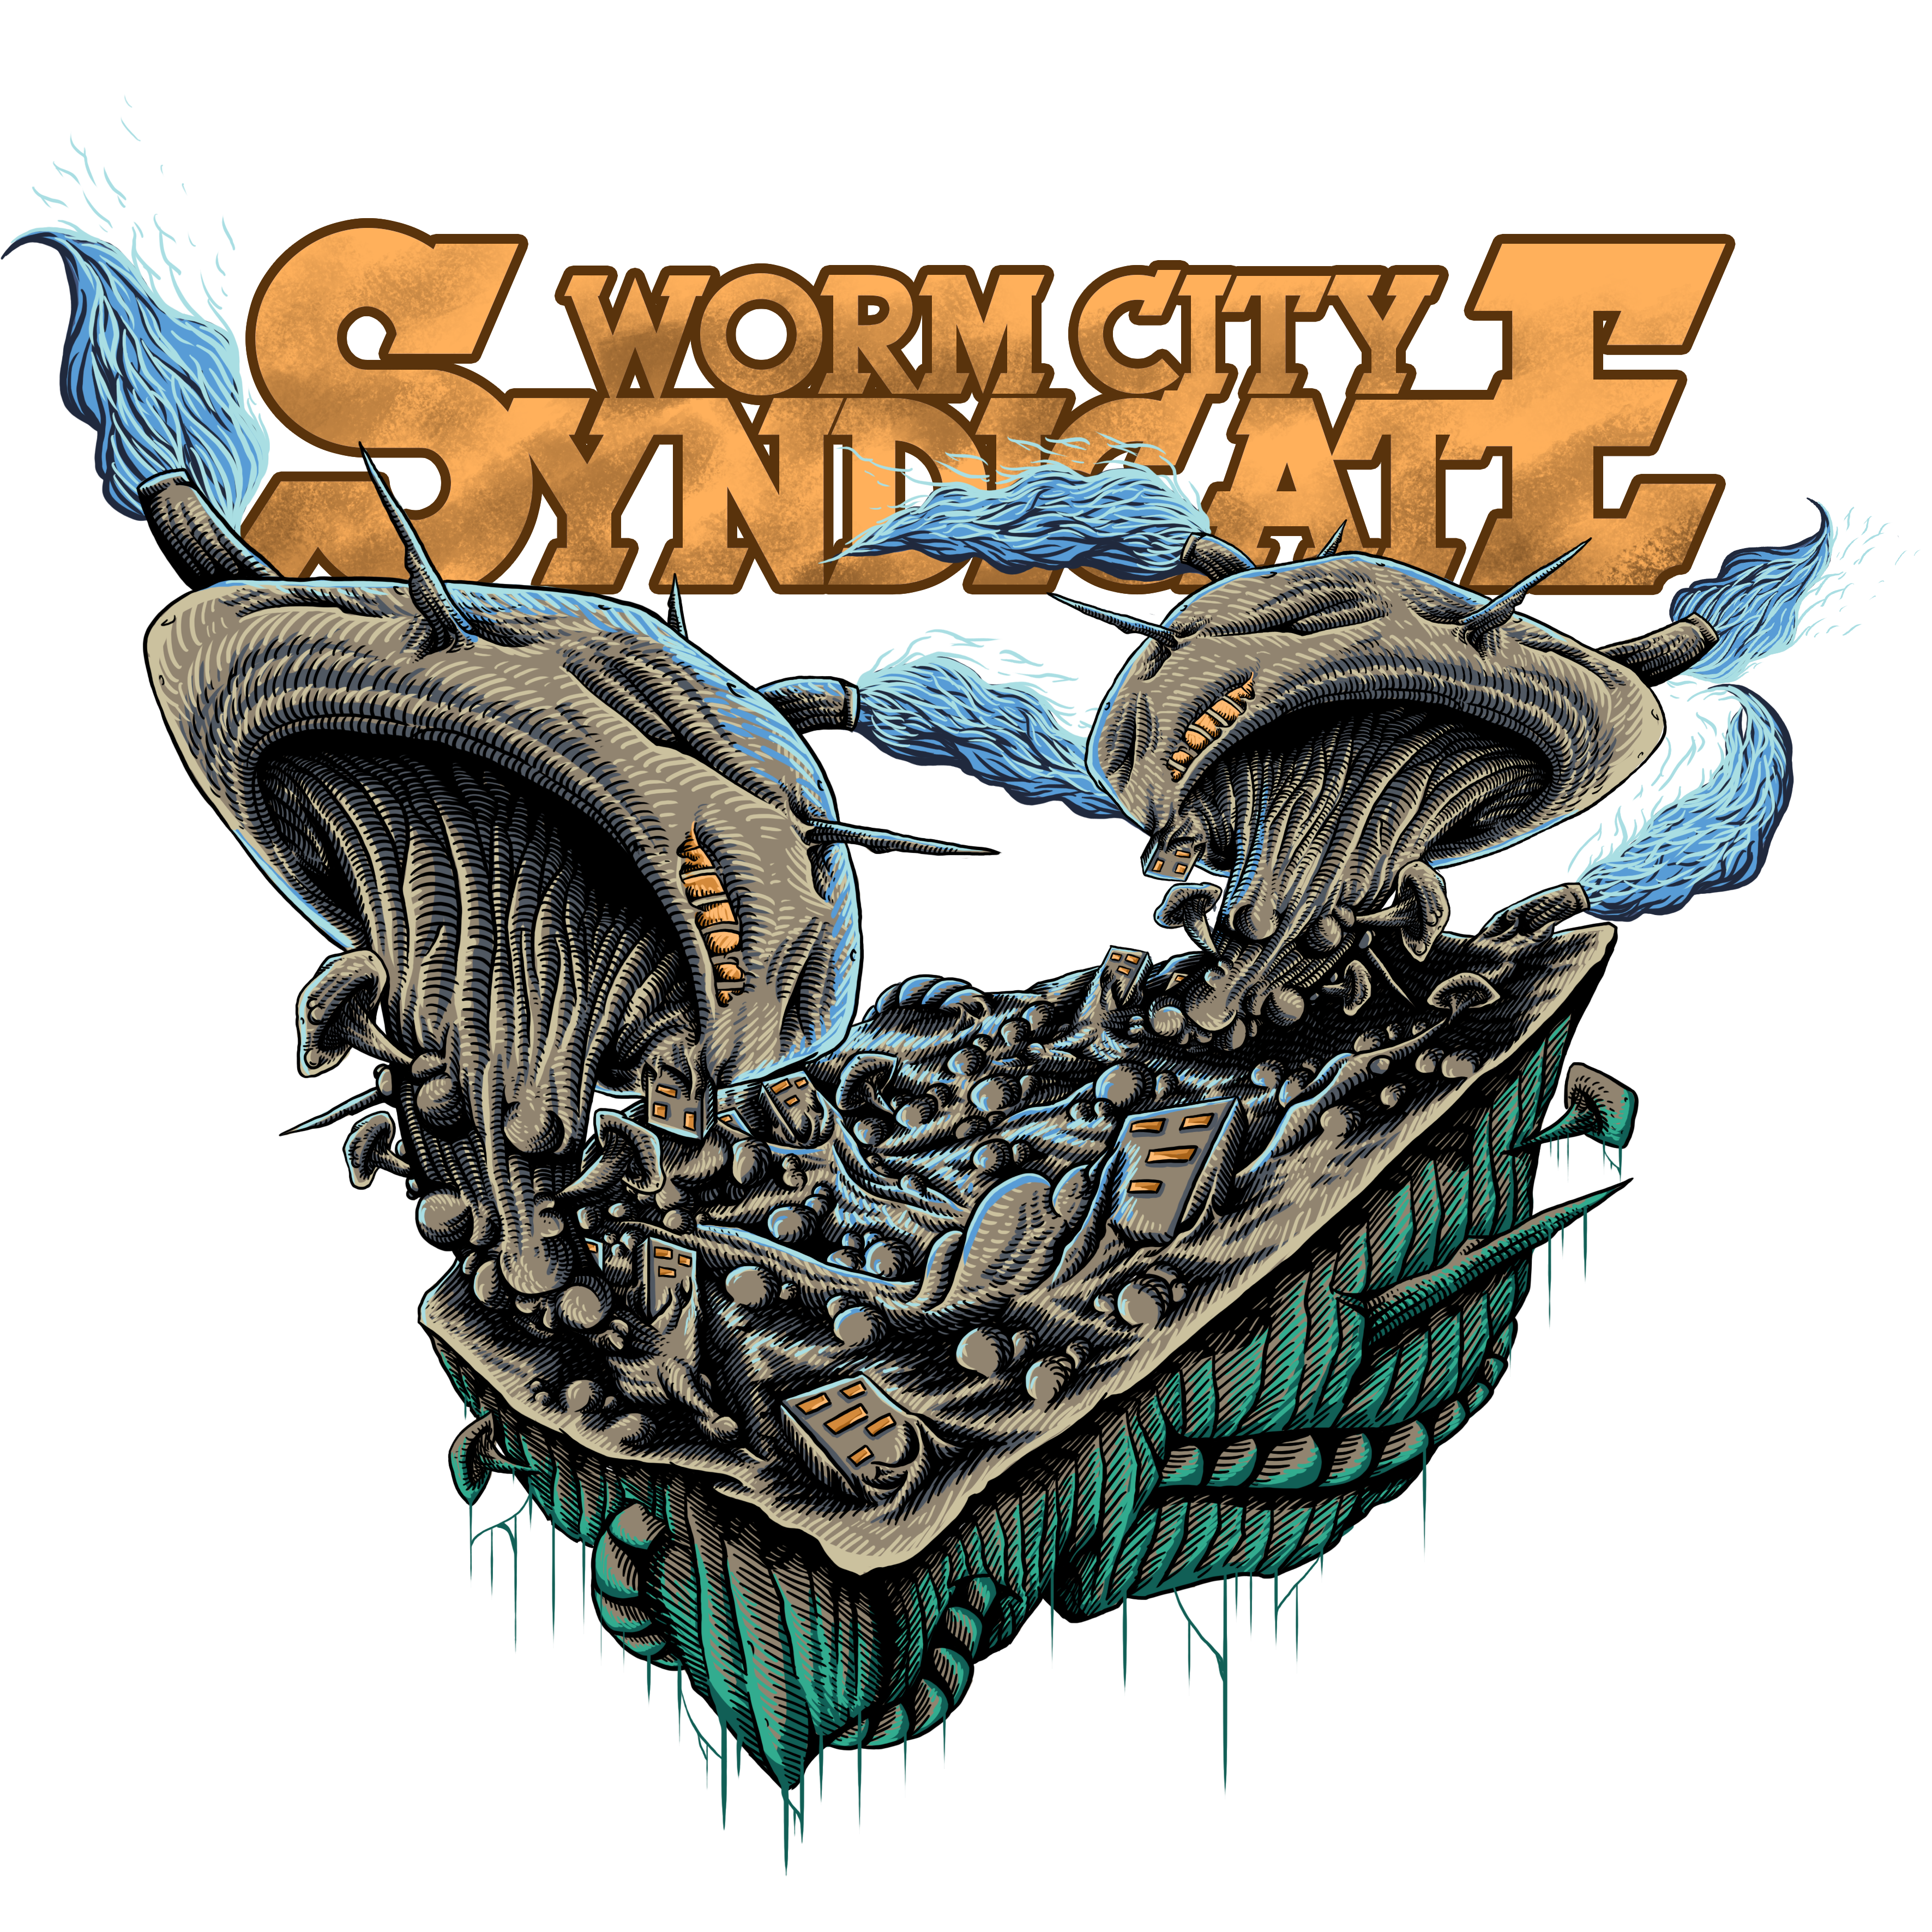 Worm City Syndicate